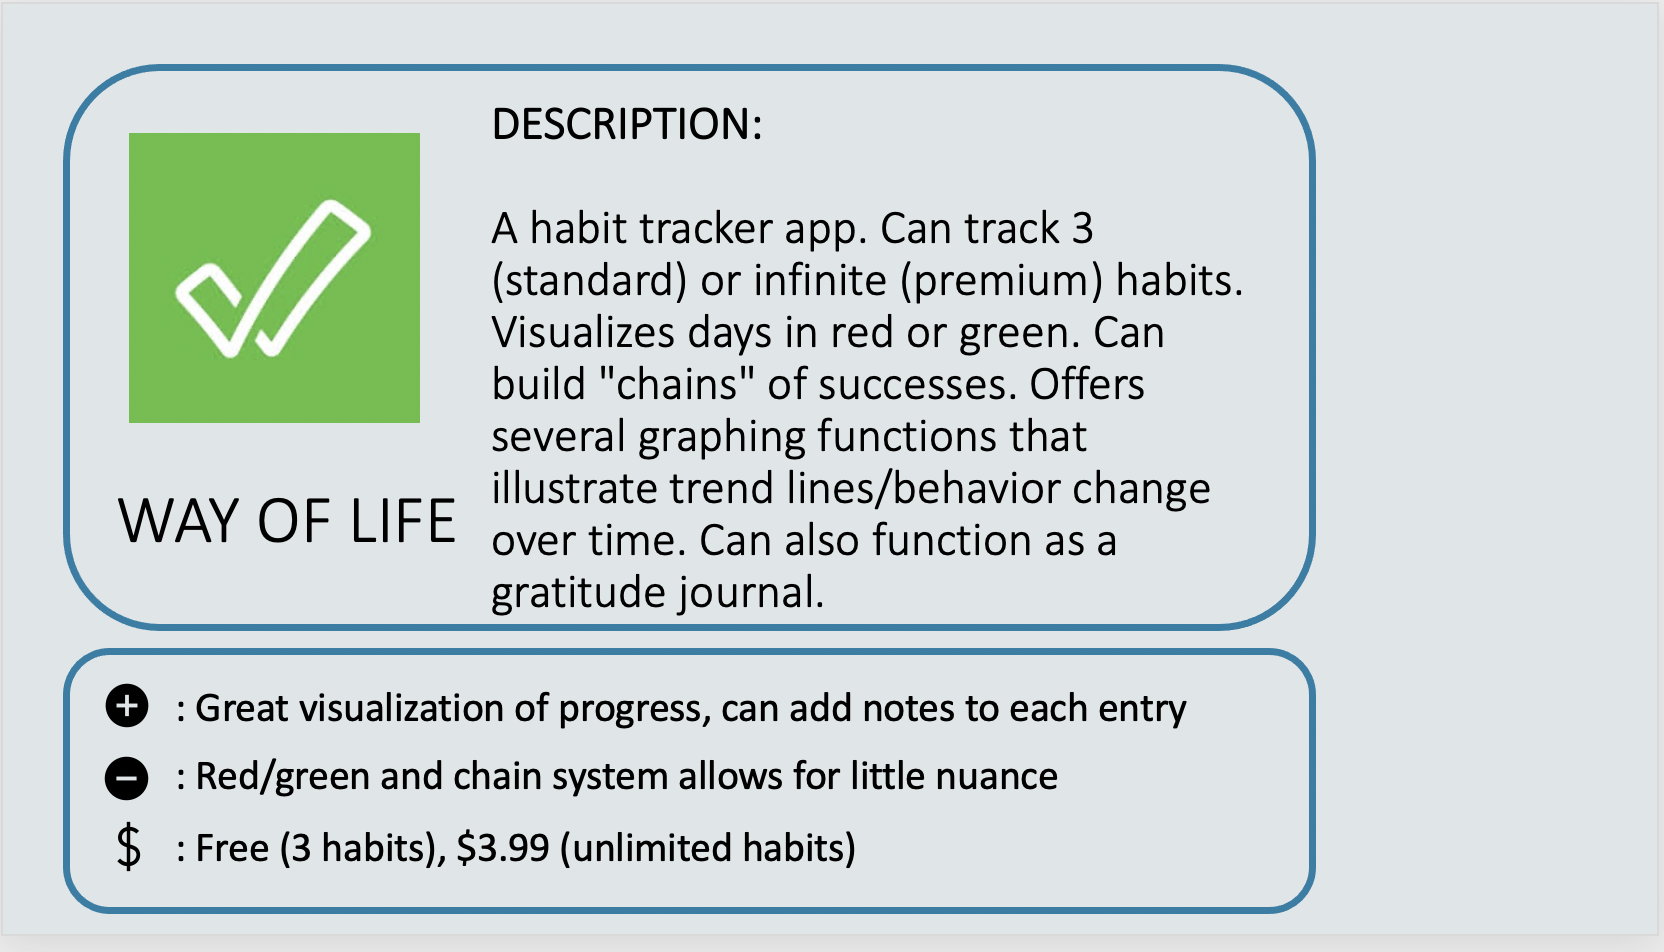 WAY OF LIFE - A habit tracker app. Can track 3 (standard) or infinite (premium) habits. Visualizes days in red or green. Can build "chains" of successes. Offers several graphing functions that illustrate trend lines/behavior change over time. Can also function as a gratitude journal.Positive: Great visualization of progress, can add notes to each entry. Negative: Red/green and chain system allows for little nuance. Cost: Free (3 habits), $3.99 (unlimited habits)